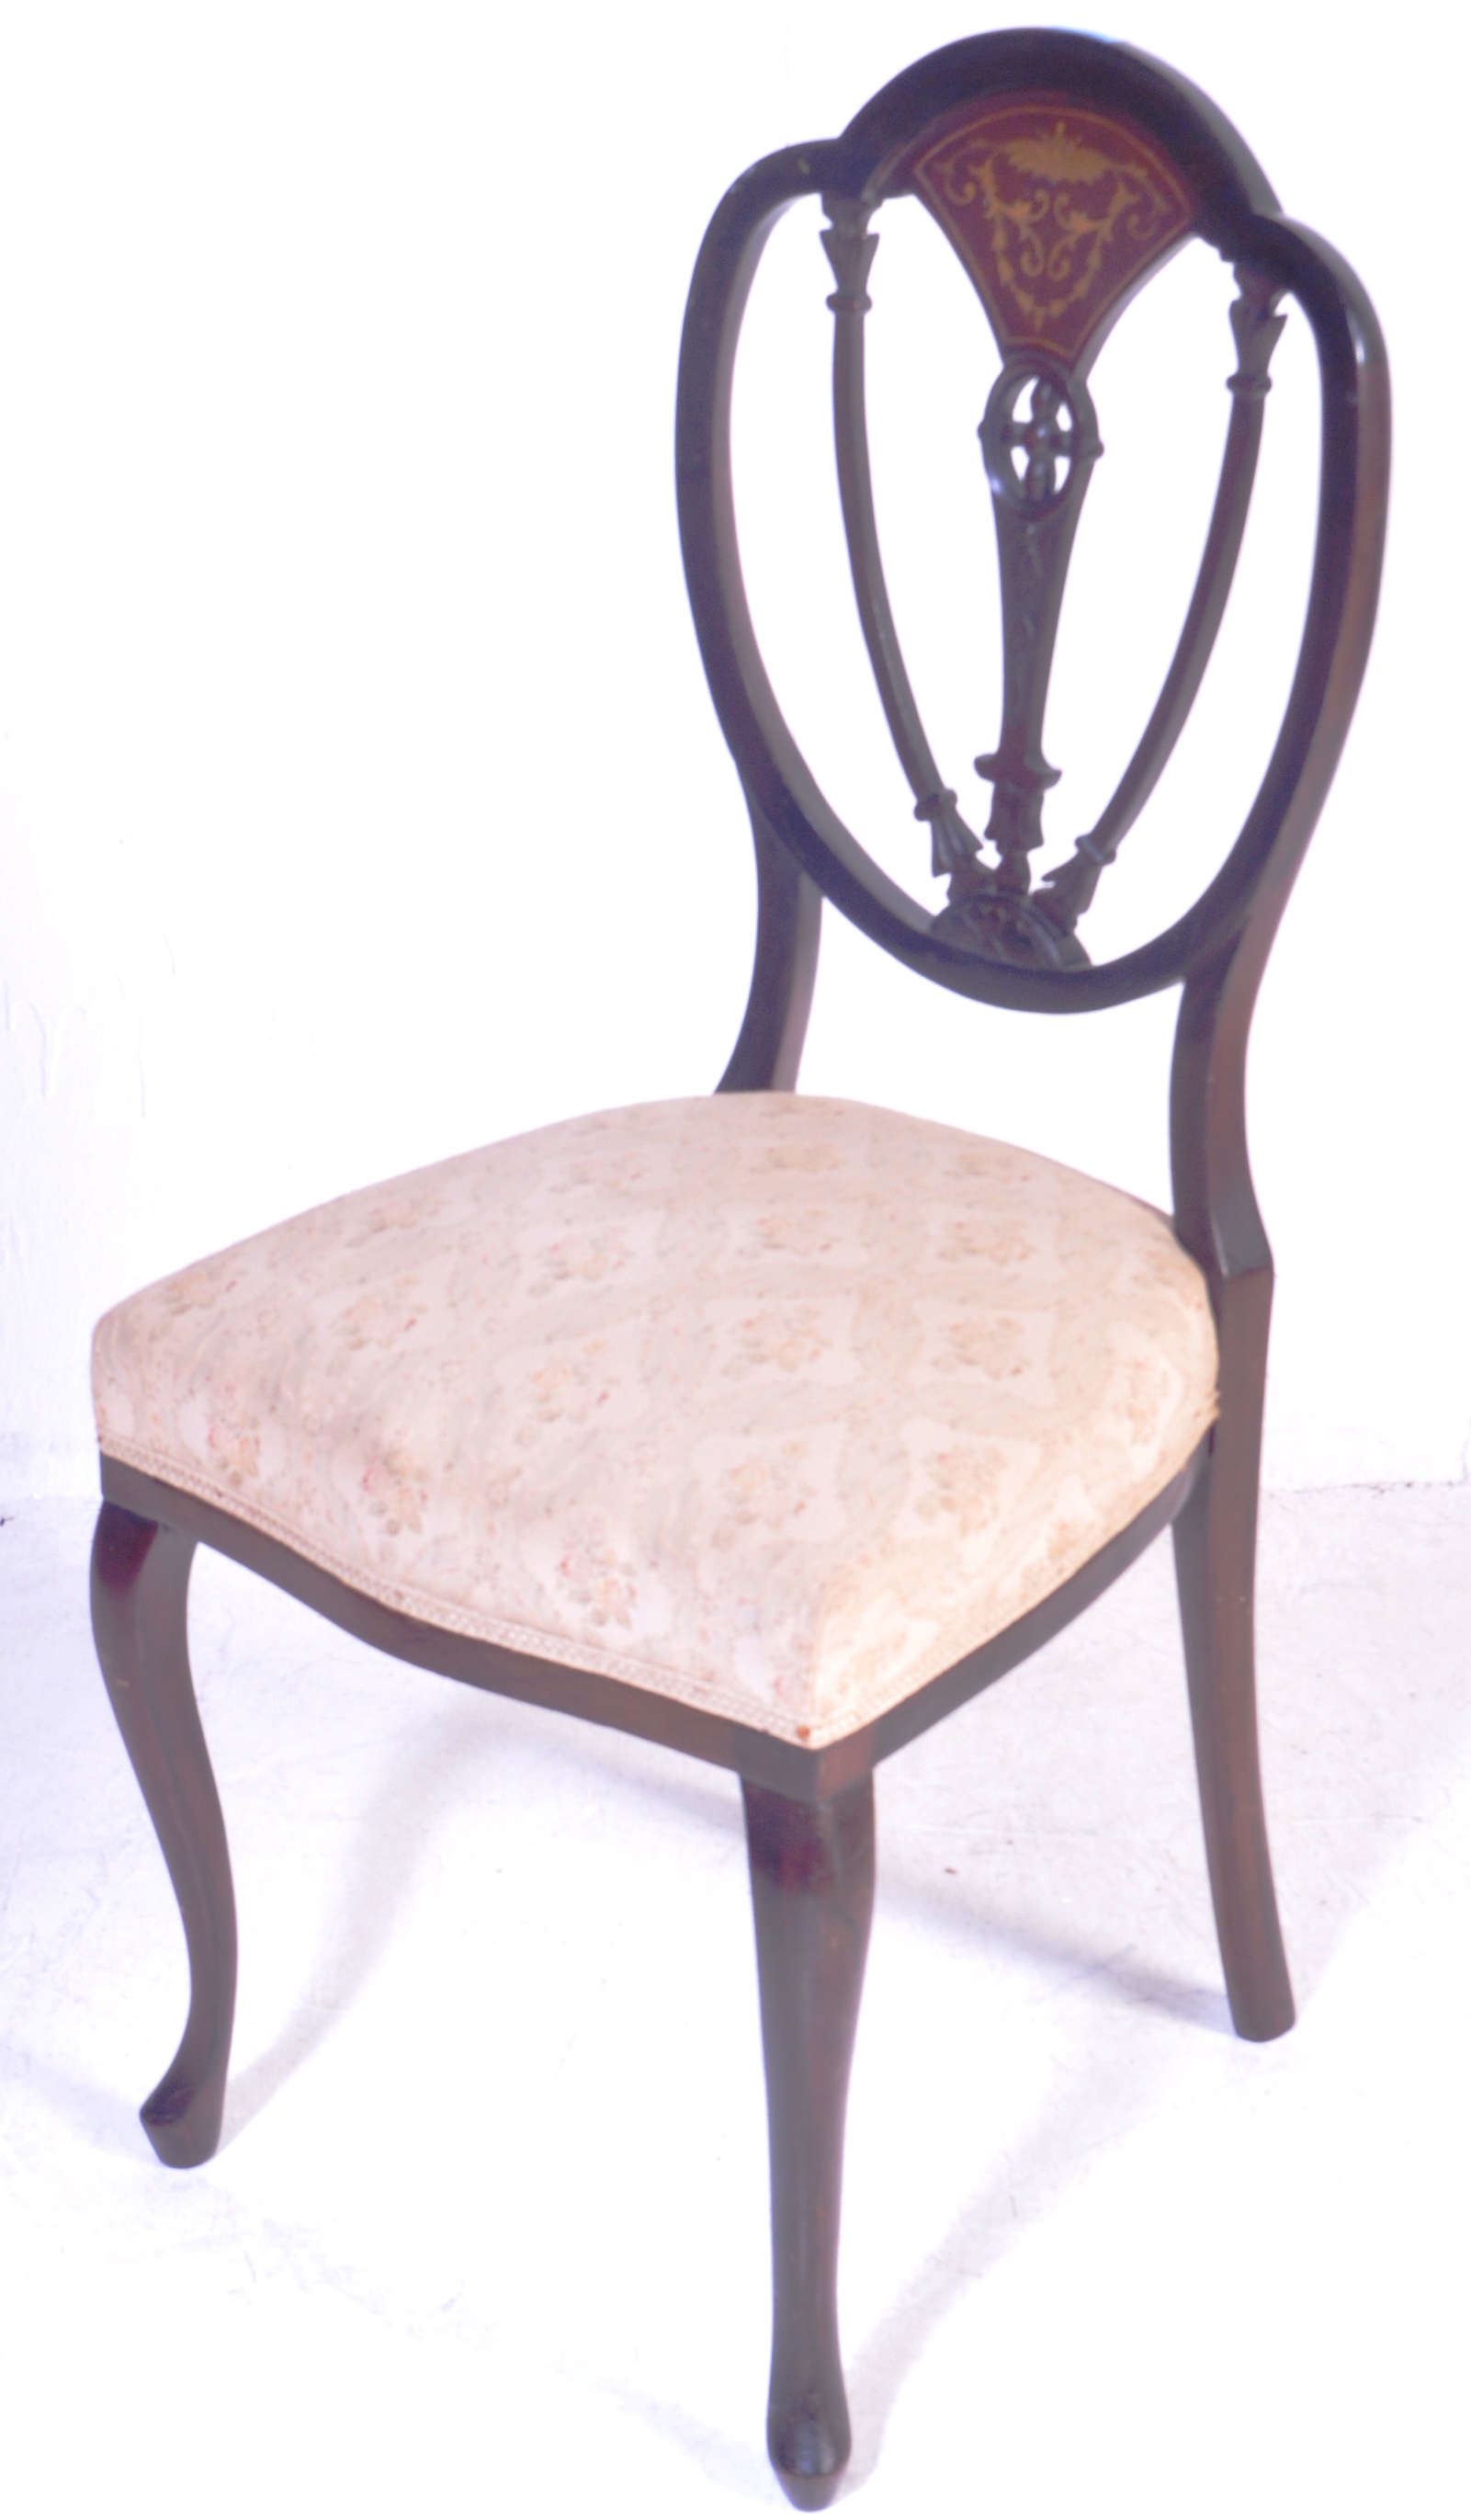 EDWARDIAN MAHOGANY INLAID UPHOLSTERED BEDROOM CHAIR - Image 2 of 5